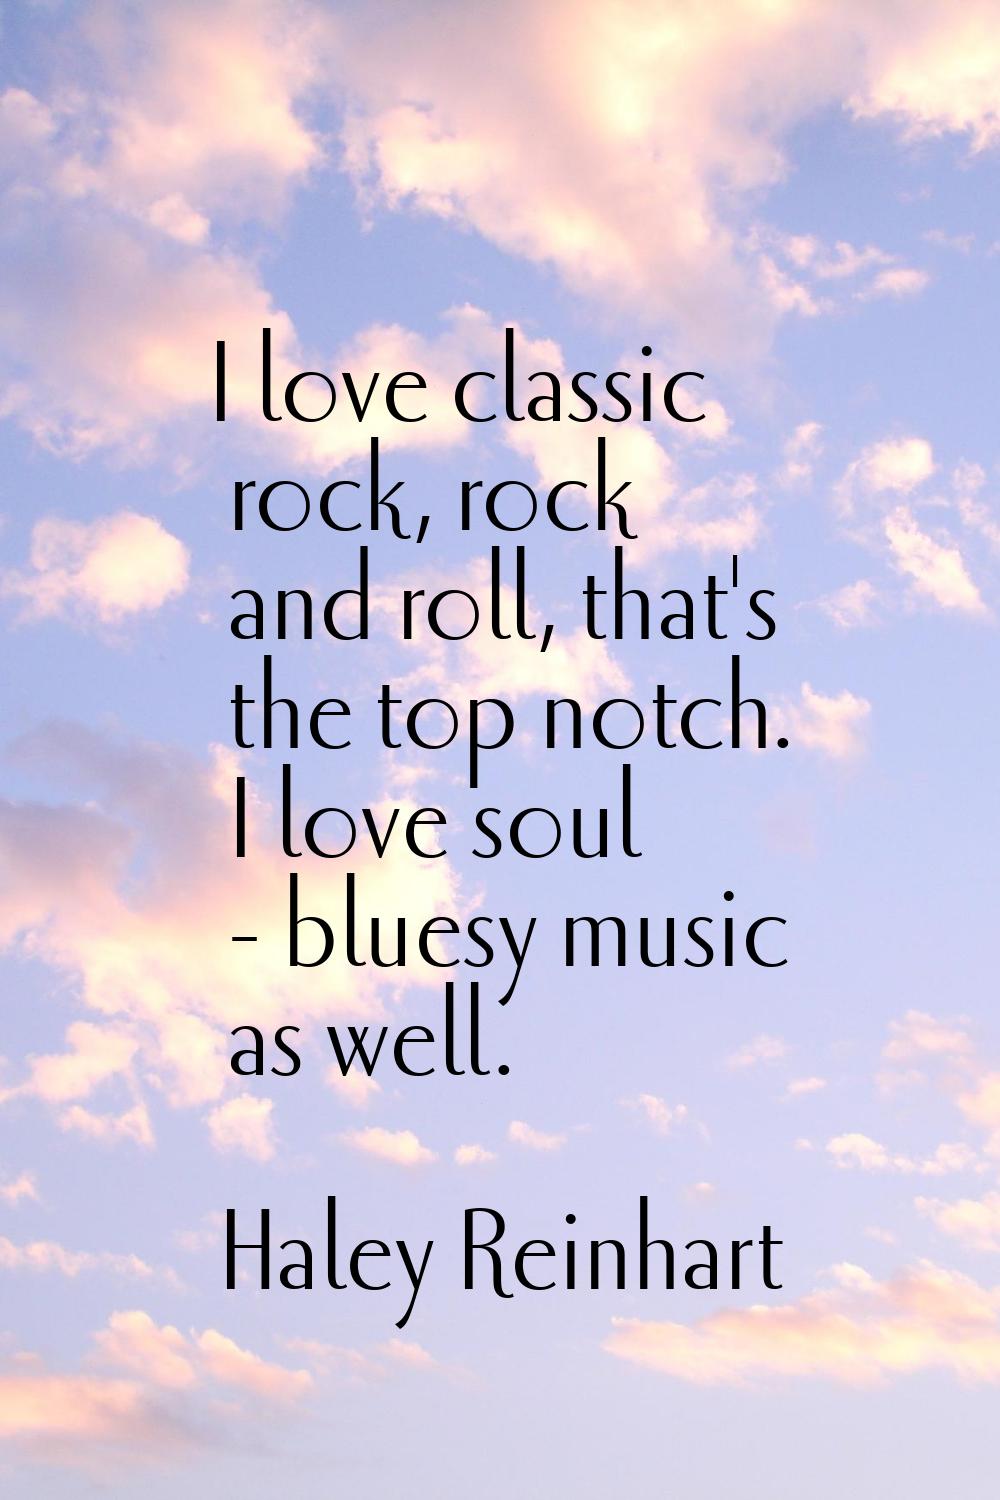 I love classic rock, rock and roll, that's the top notch. I love soul - bluesy music as well.